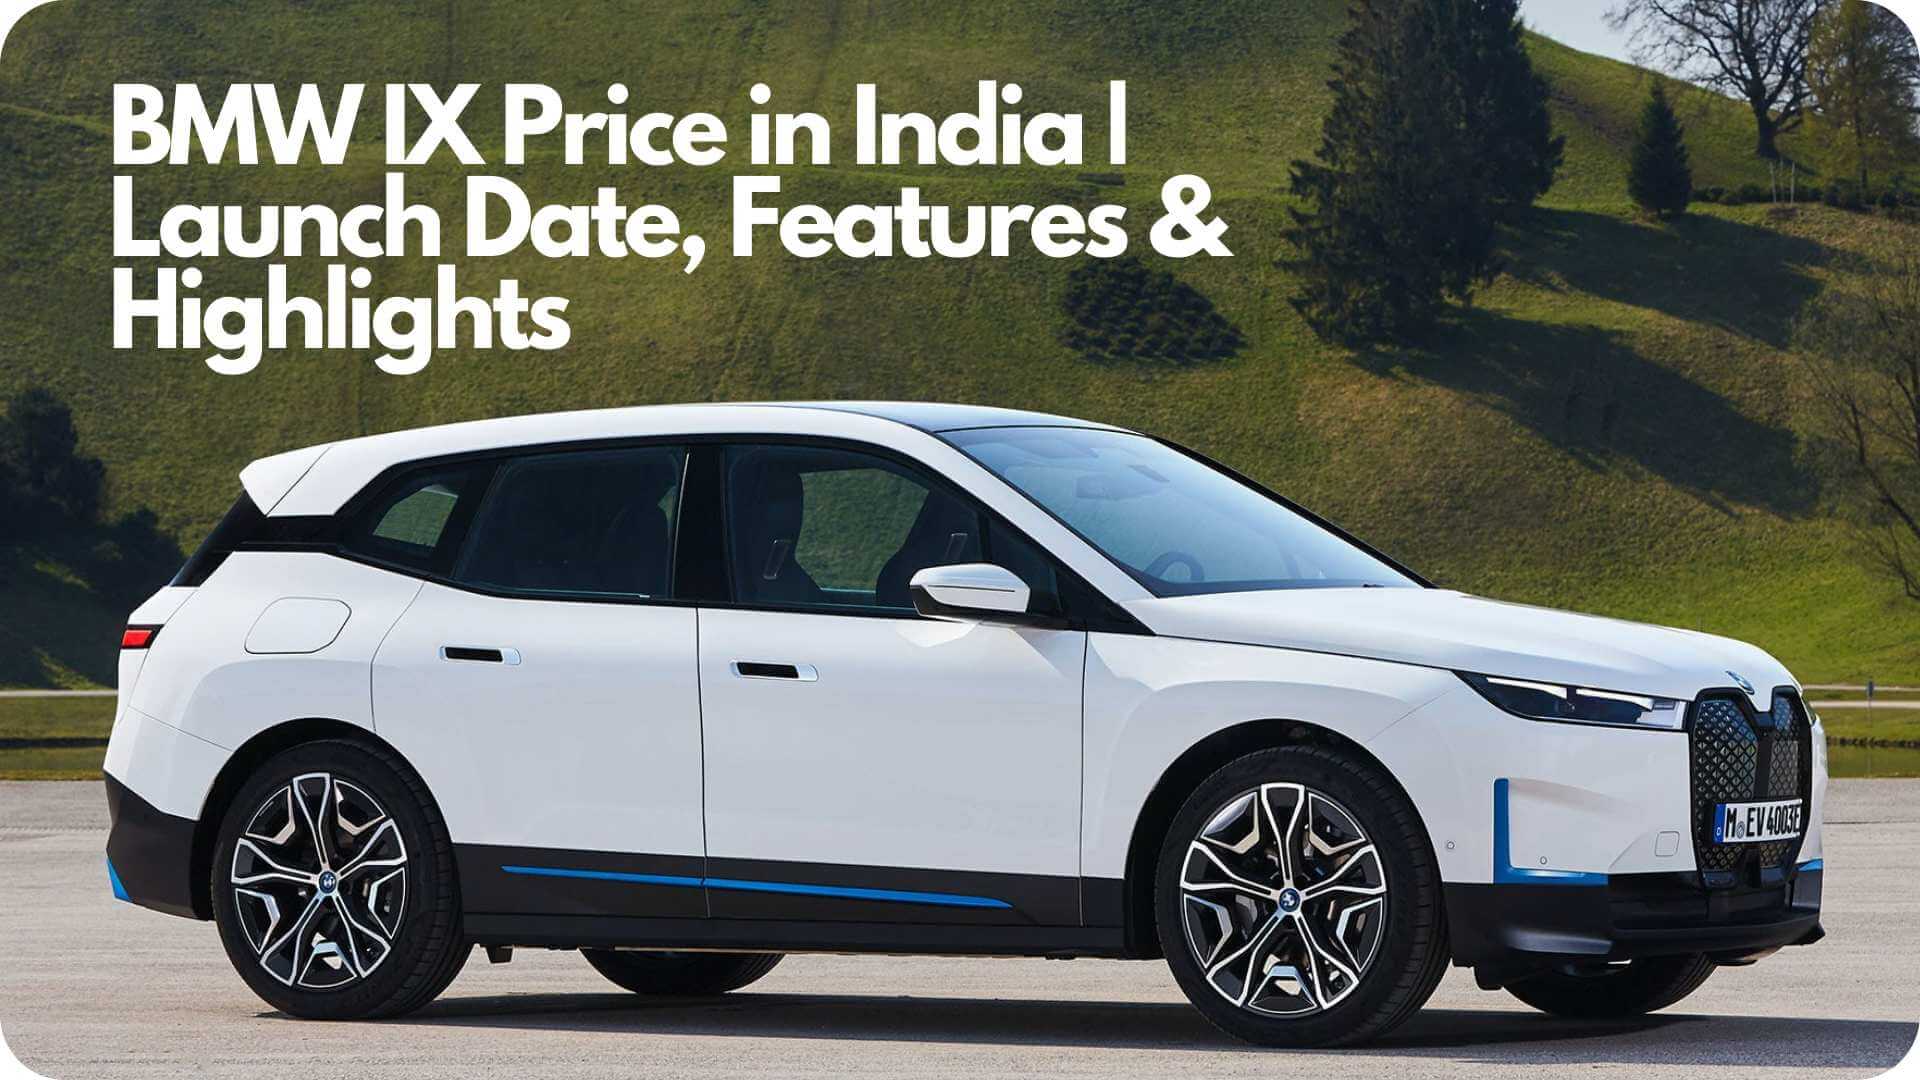 https://e-vehicleinfo.com/bmw-ix-price-in-india-launch-date-features-highlights/